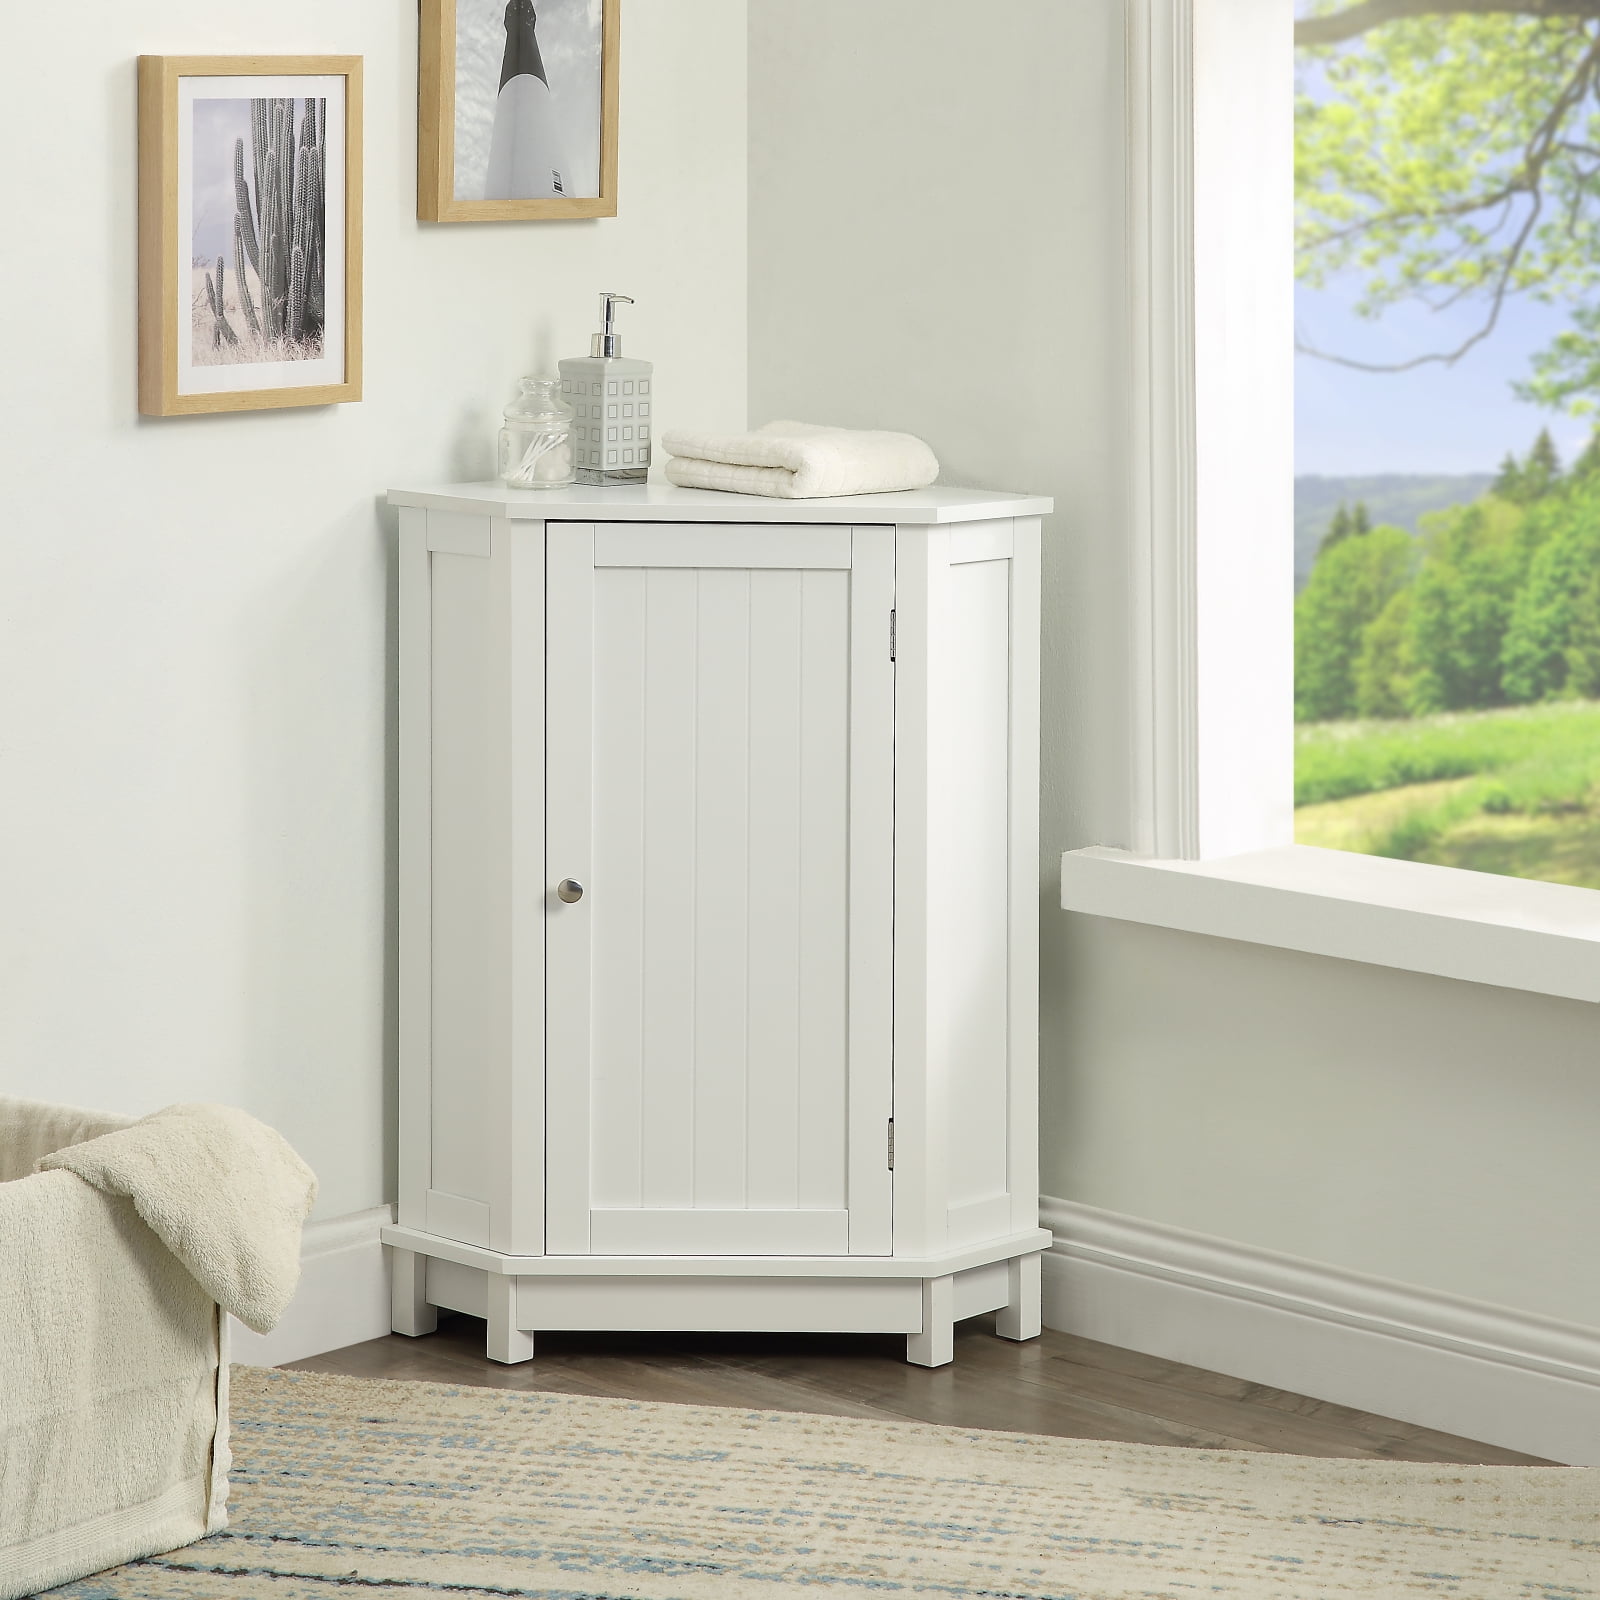 Bathroom Storage Cabinet Corner Freestanding Cabinet for Home Office Wood Floor Cabinet with Drawers and Doors White 